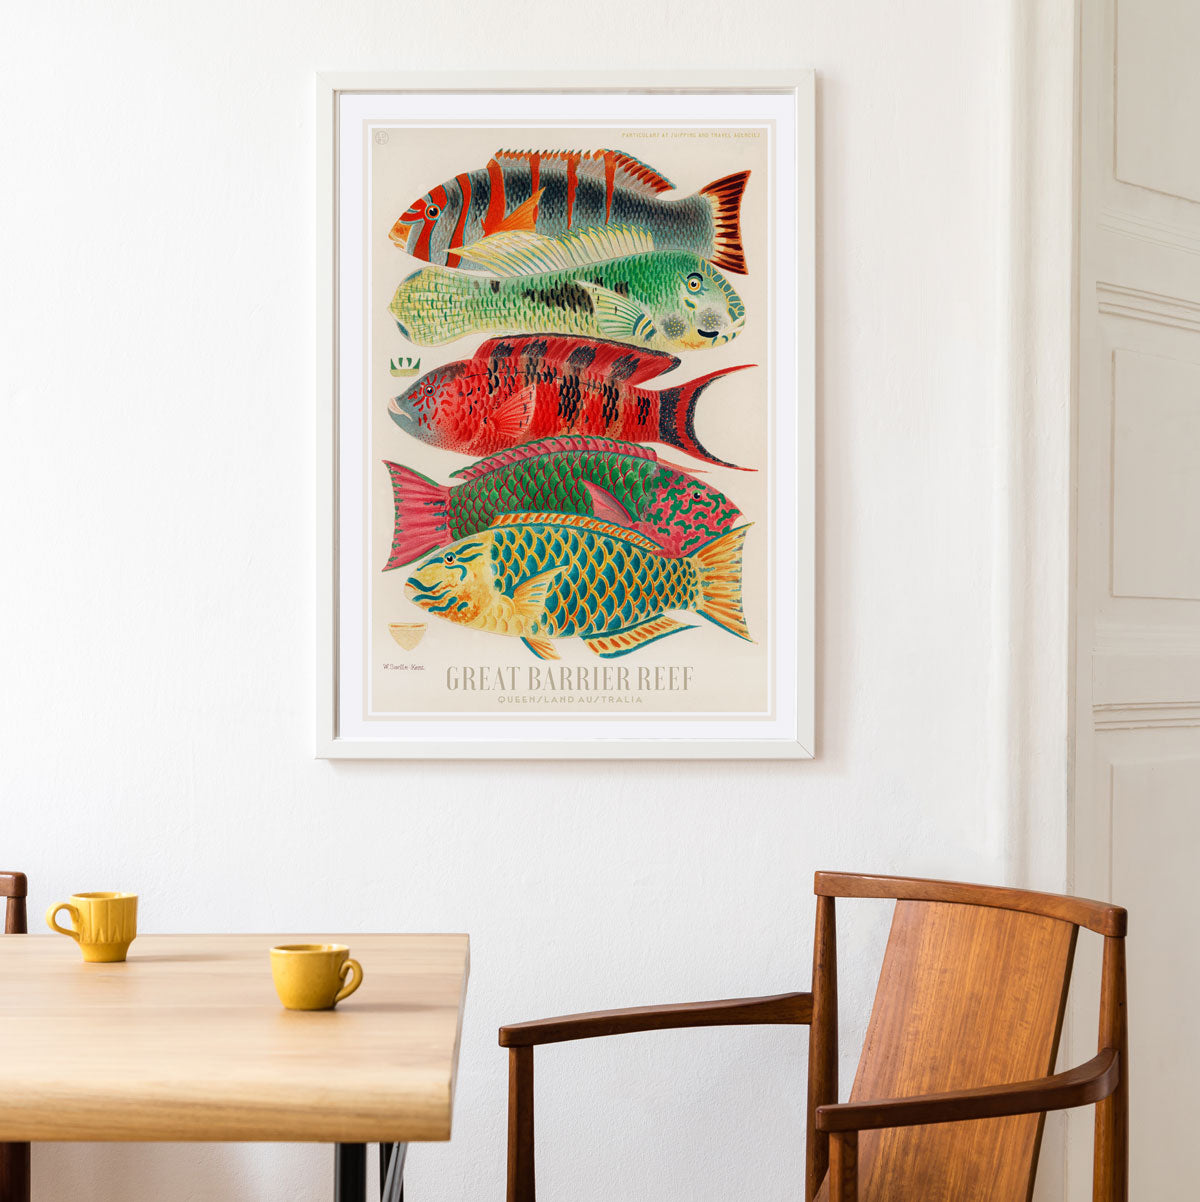 Great Barrier Reef vintage retro poster print in room from Places We Luv